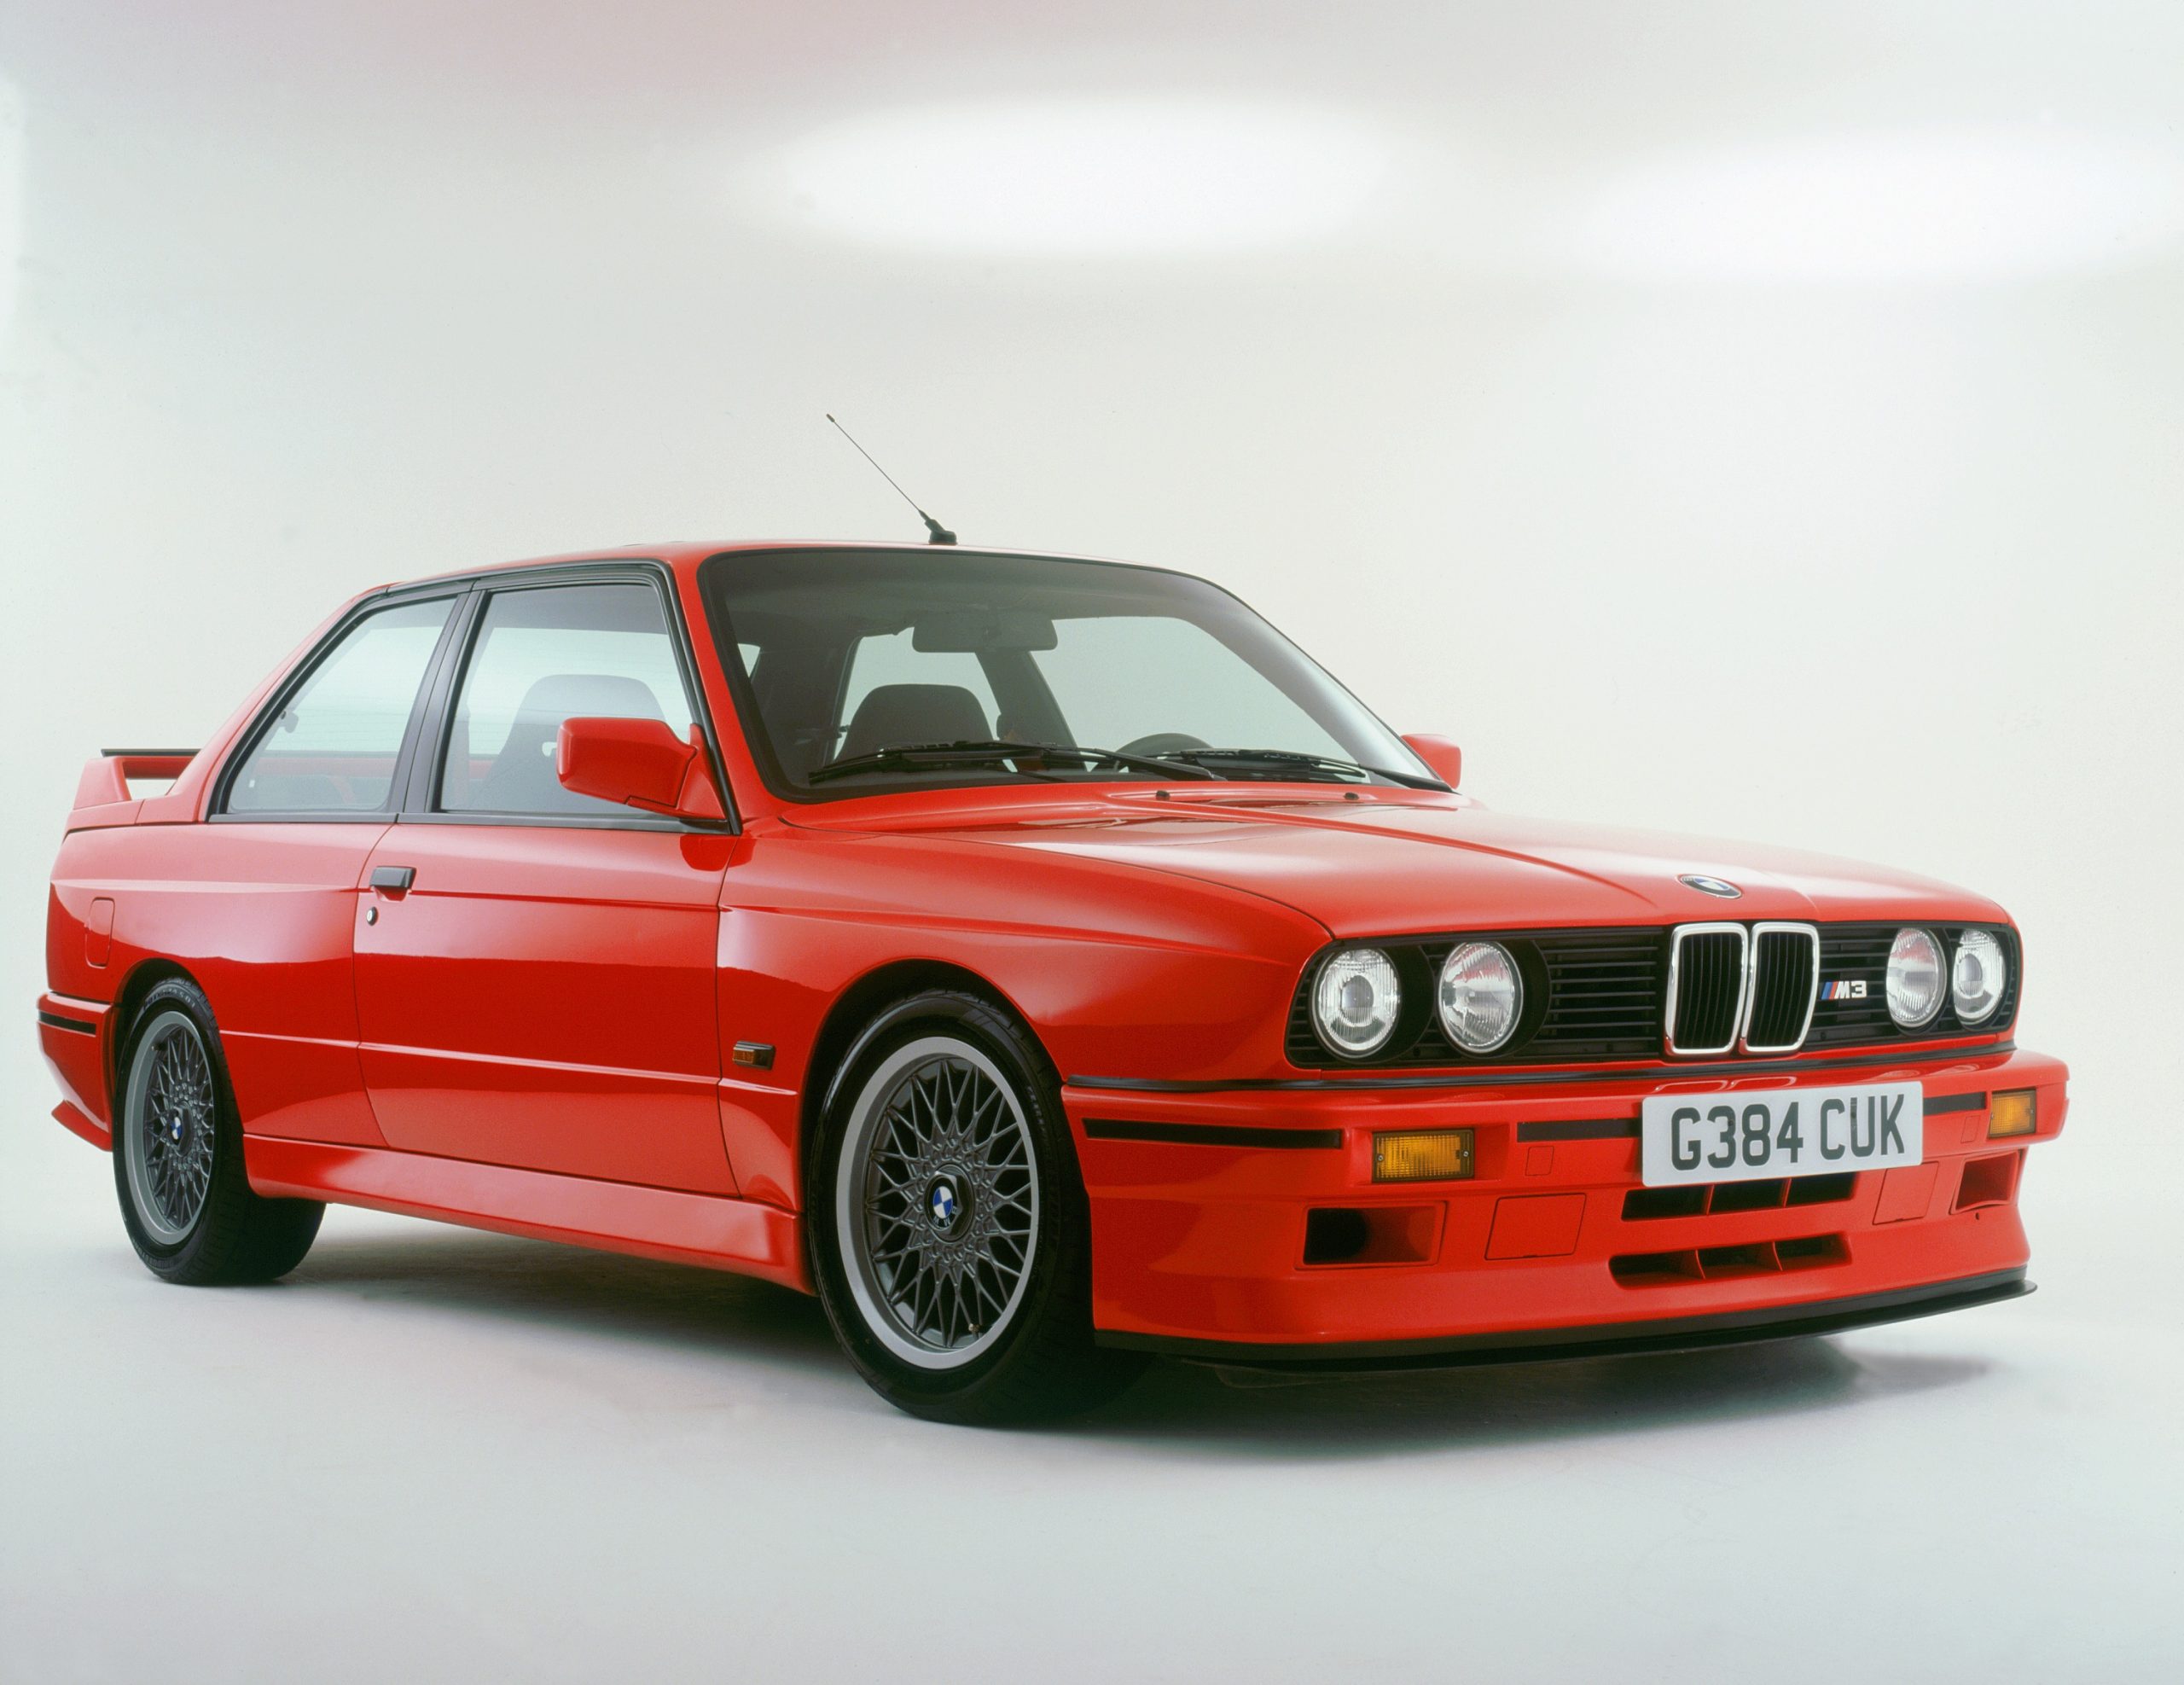 A red E30 BMW M3 sports car shot from the front 3/4